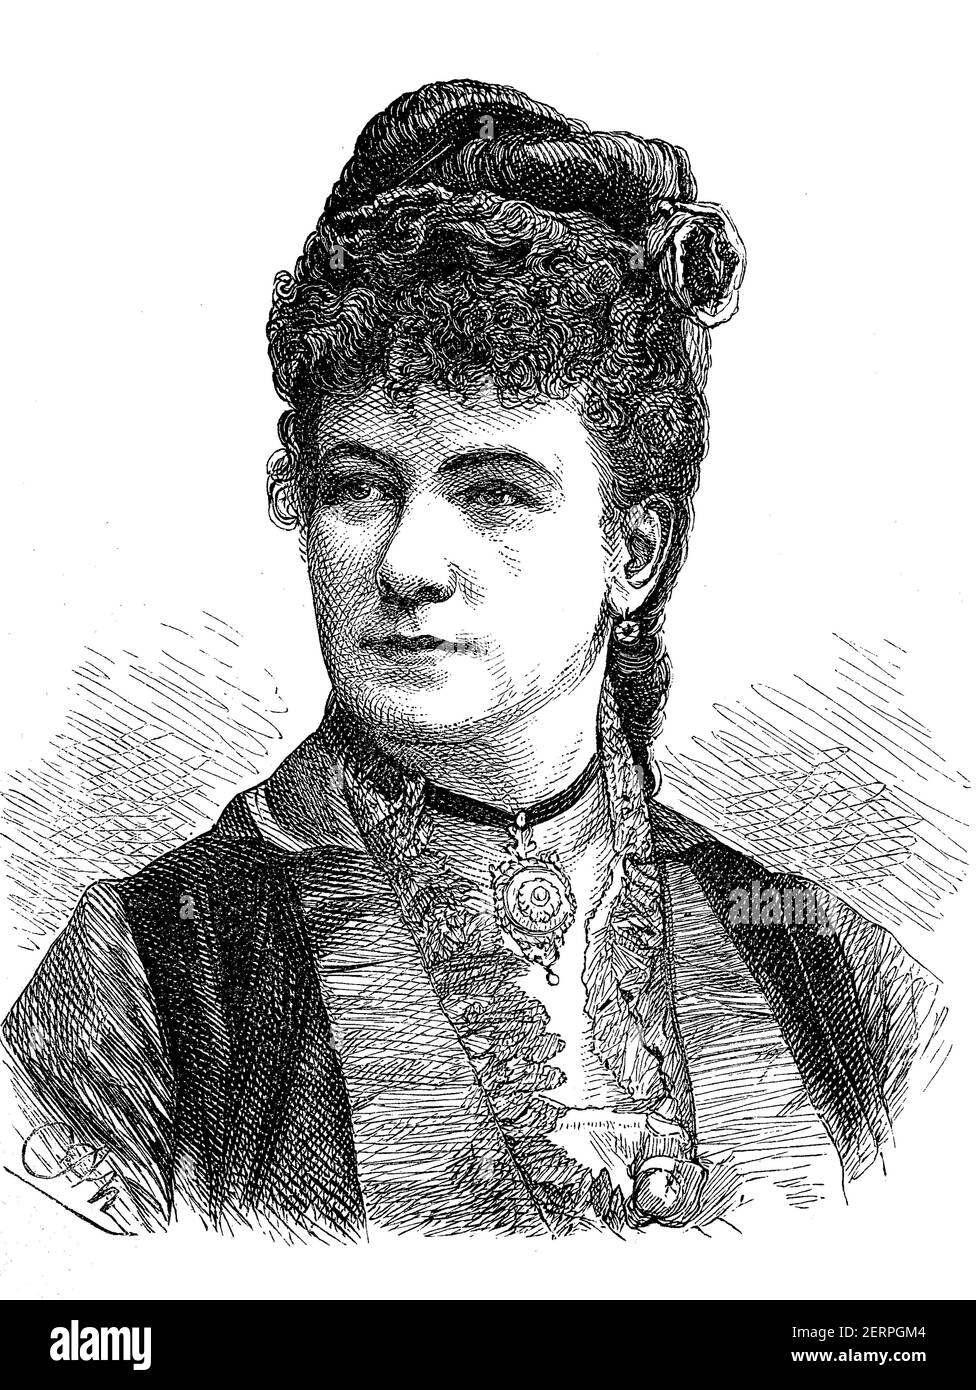 Marie Charlotte Caecilie Geistinger, July 26, 1836- September 29, 1903, was an Austrian actress and opera singer  /  Marie Charlotte Caecilie Geisting Stock Photo